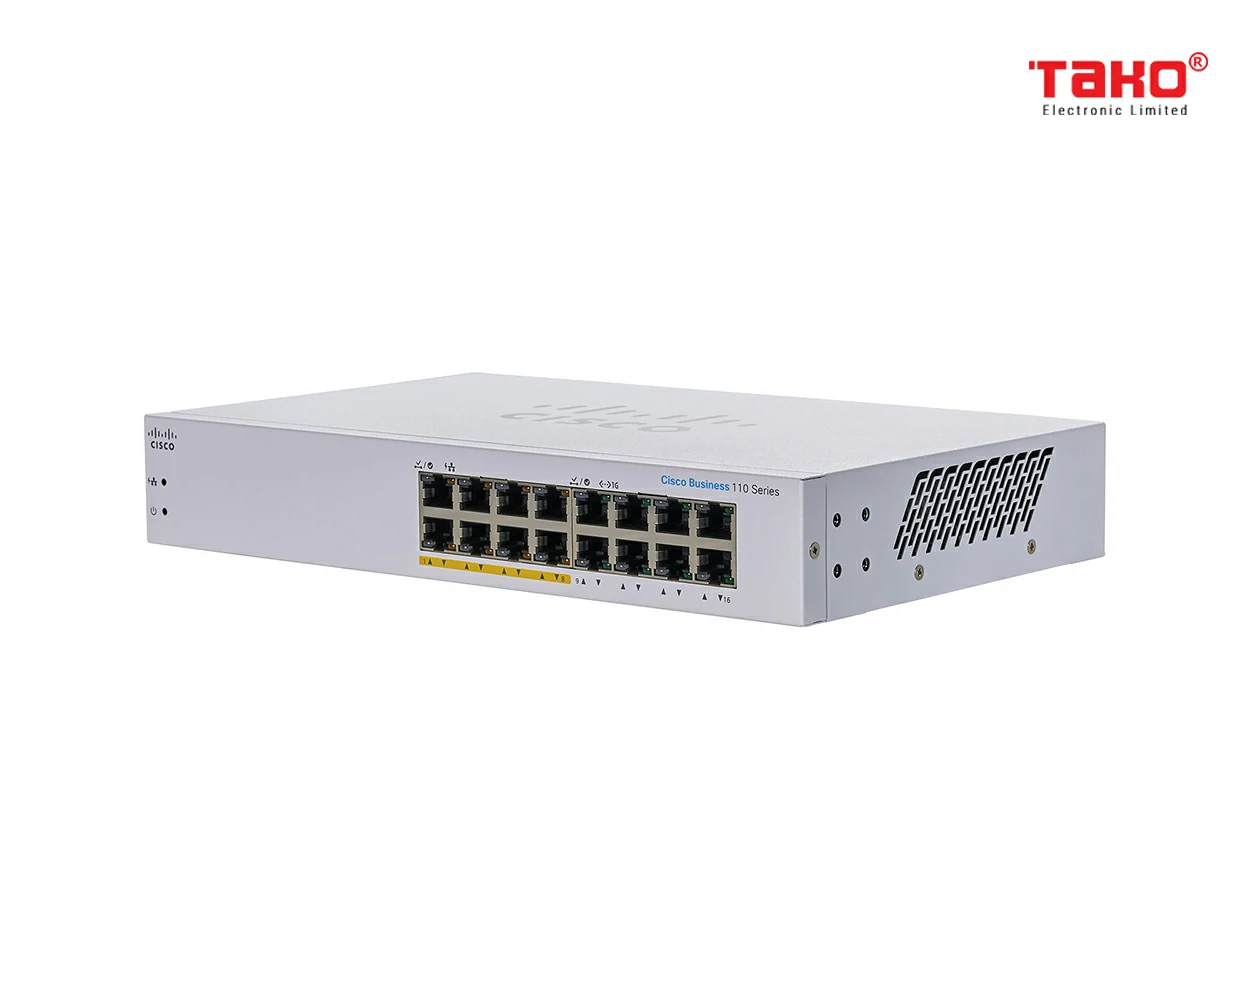 Cisco CBS110-16PP 16 port 10/100/1000 Mbps unmanageable switch, 8 of which are PoE 2